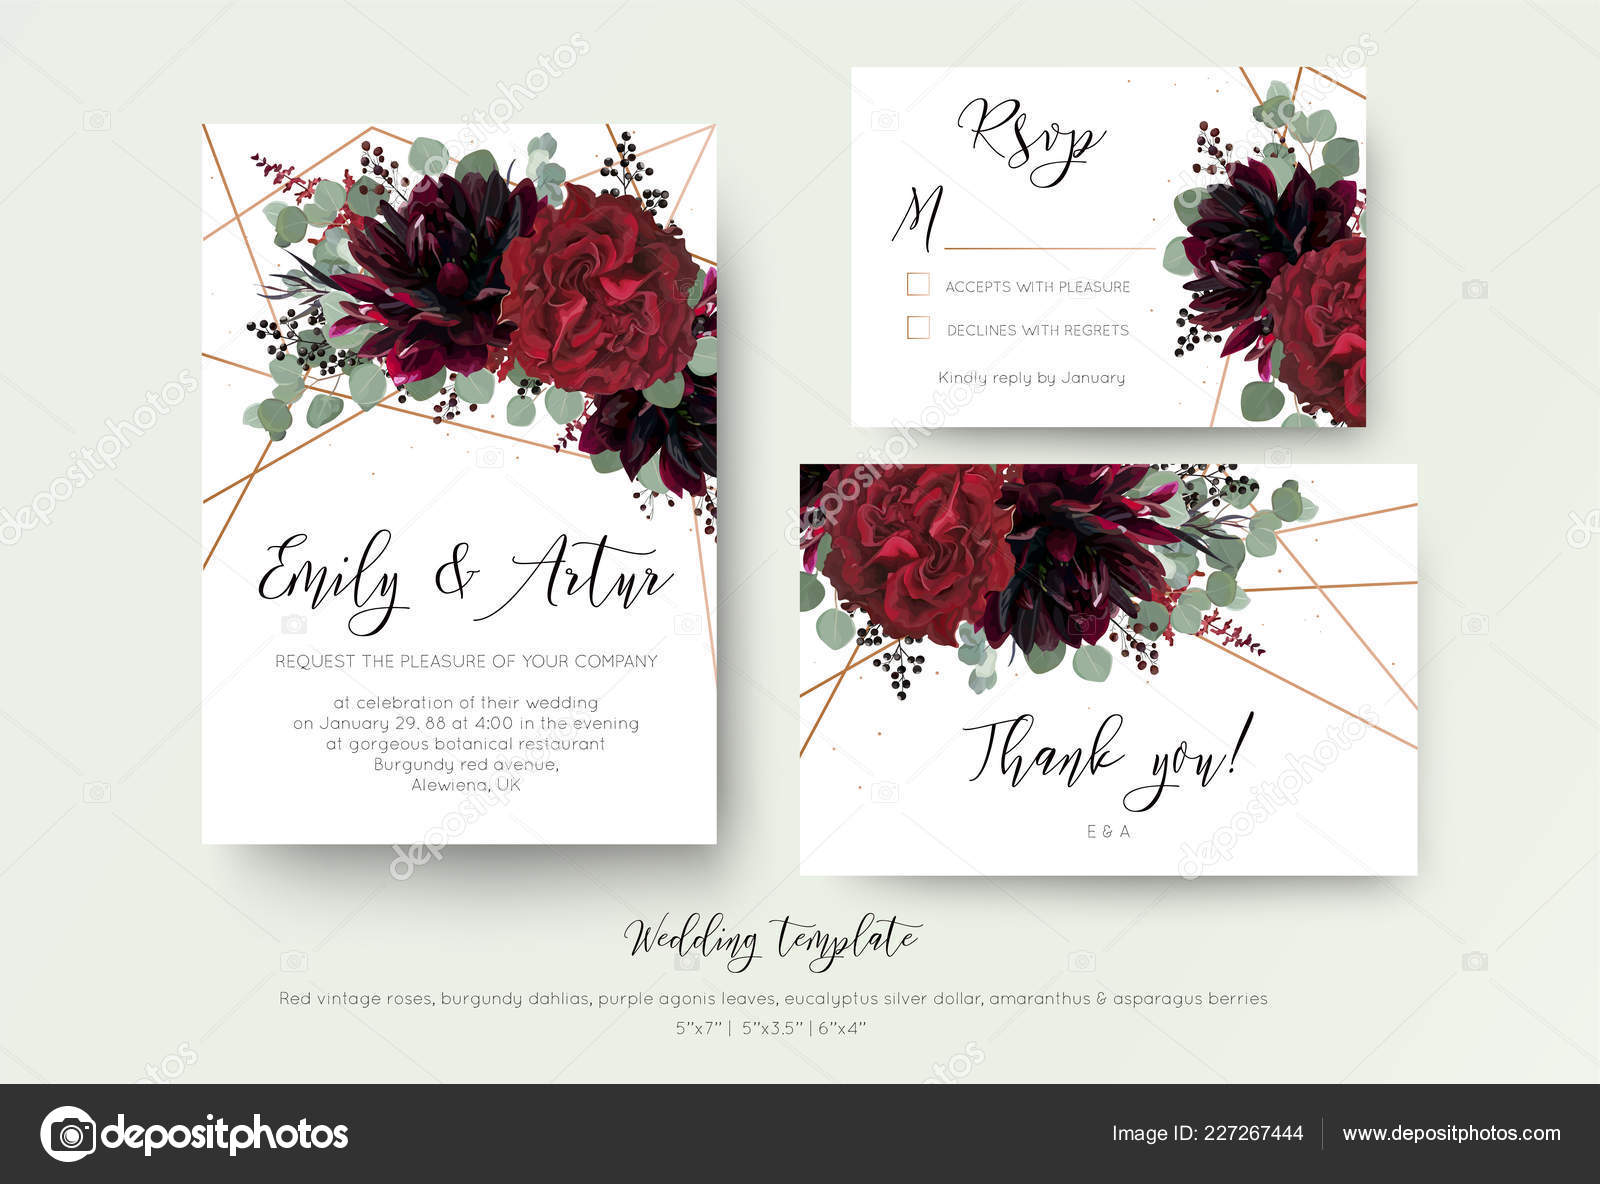 Ruby Wedding Invitation Red Rose & Eucalyptus Wedding Save the Date template DIY Floral Wedding Save the Date Editable Digital Download